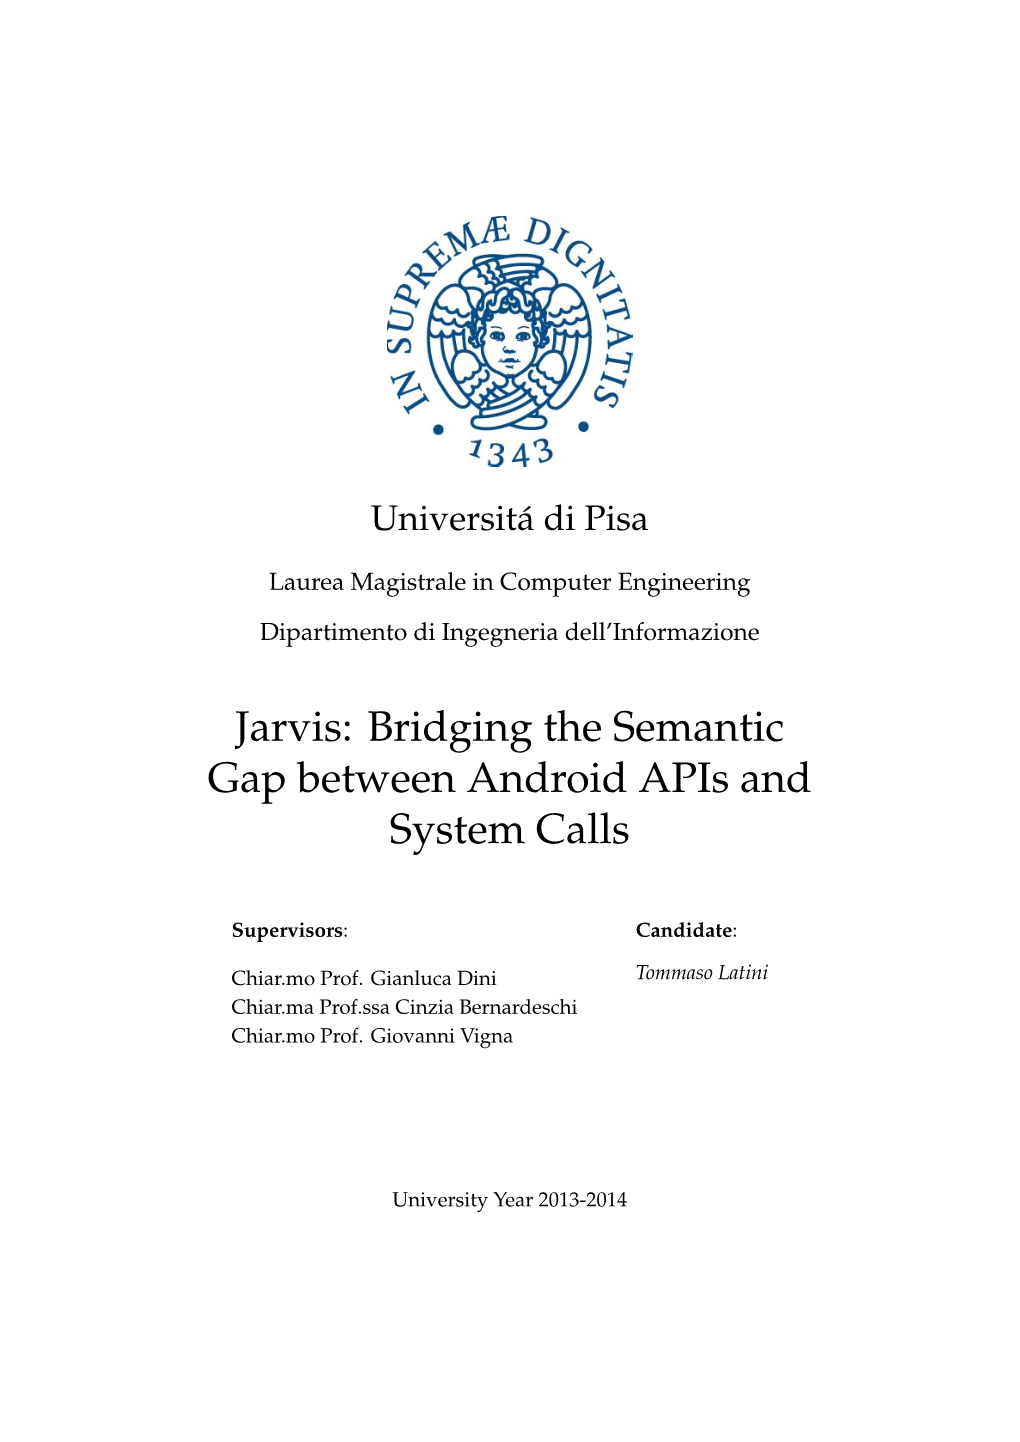 Jarvis: Bridging the Semantic Gap Between Android Apis and System Calls